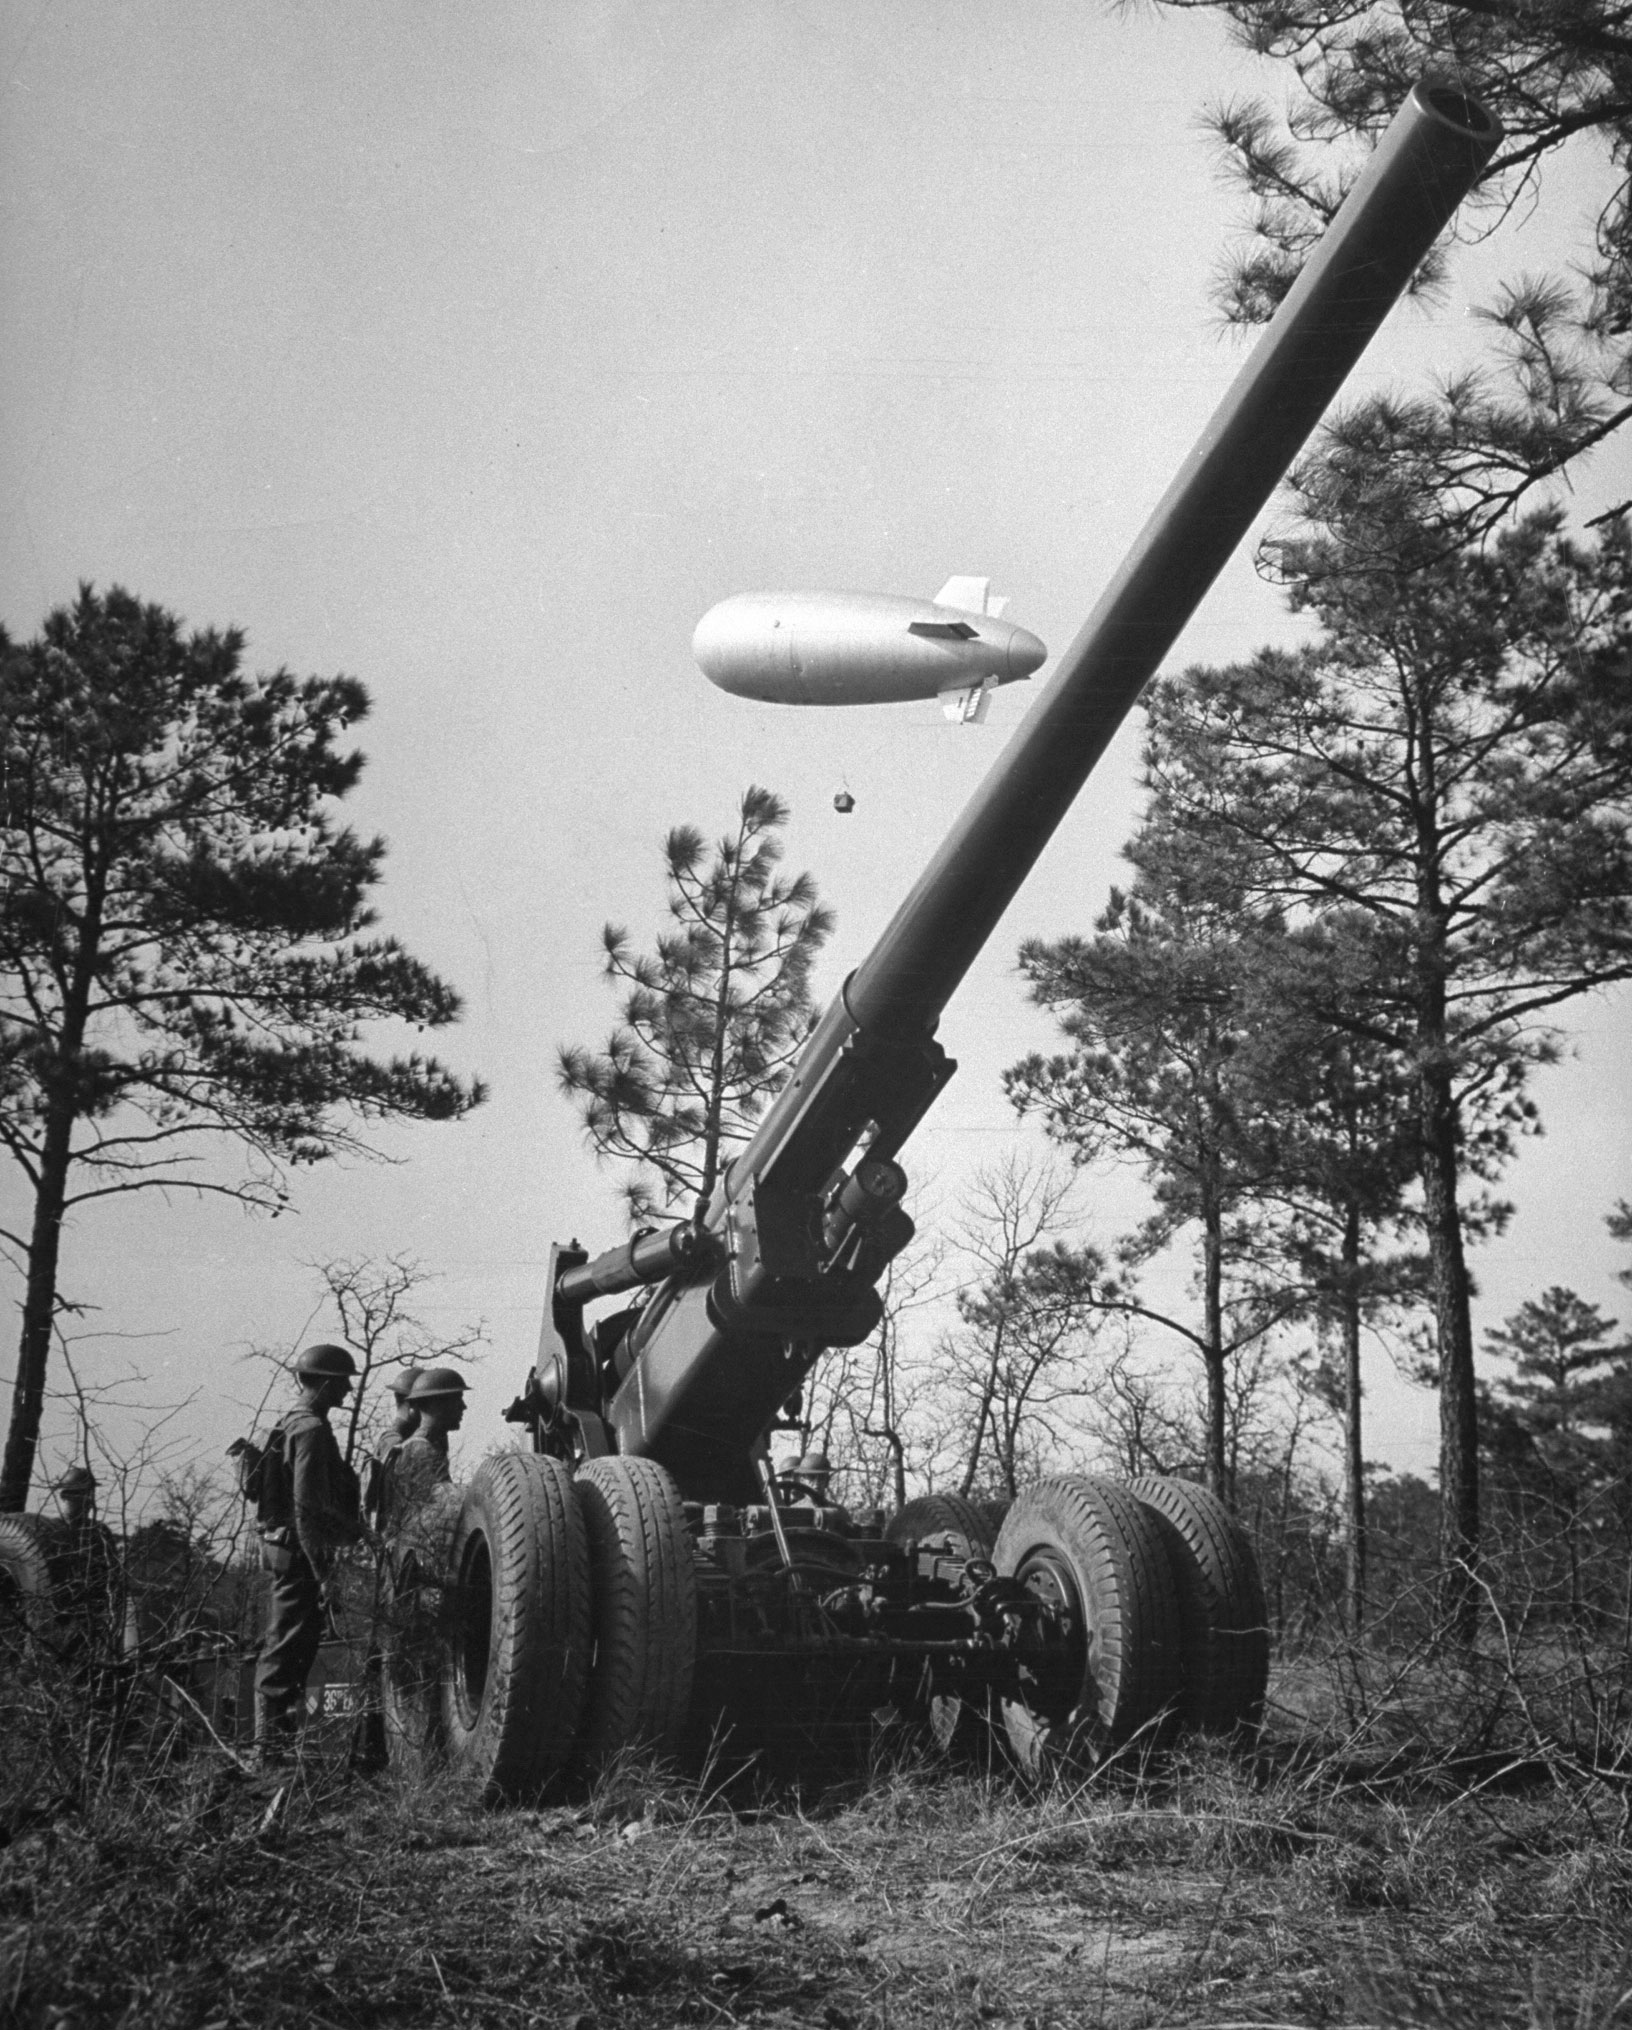 An observation balloon spotting for a 155mm gun at Fort Bragg, 1940.